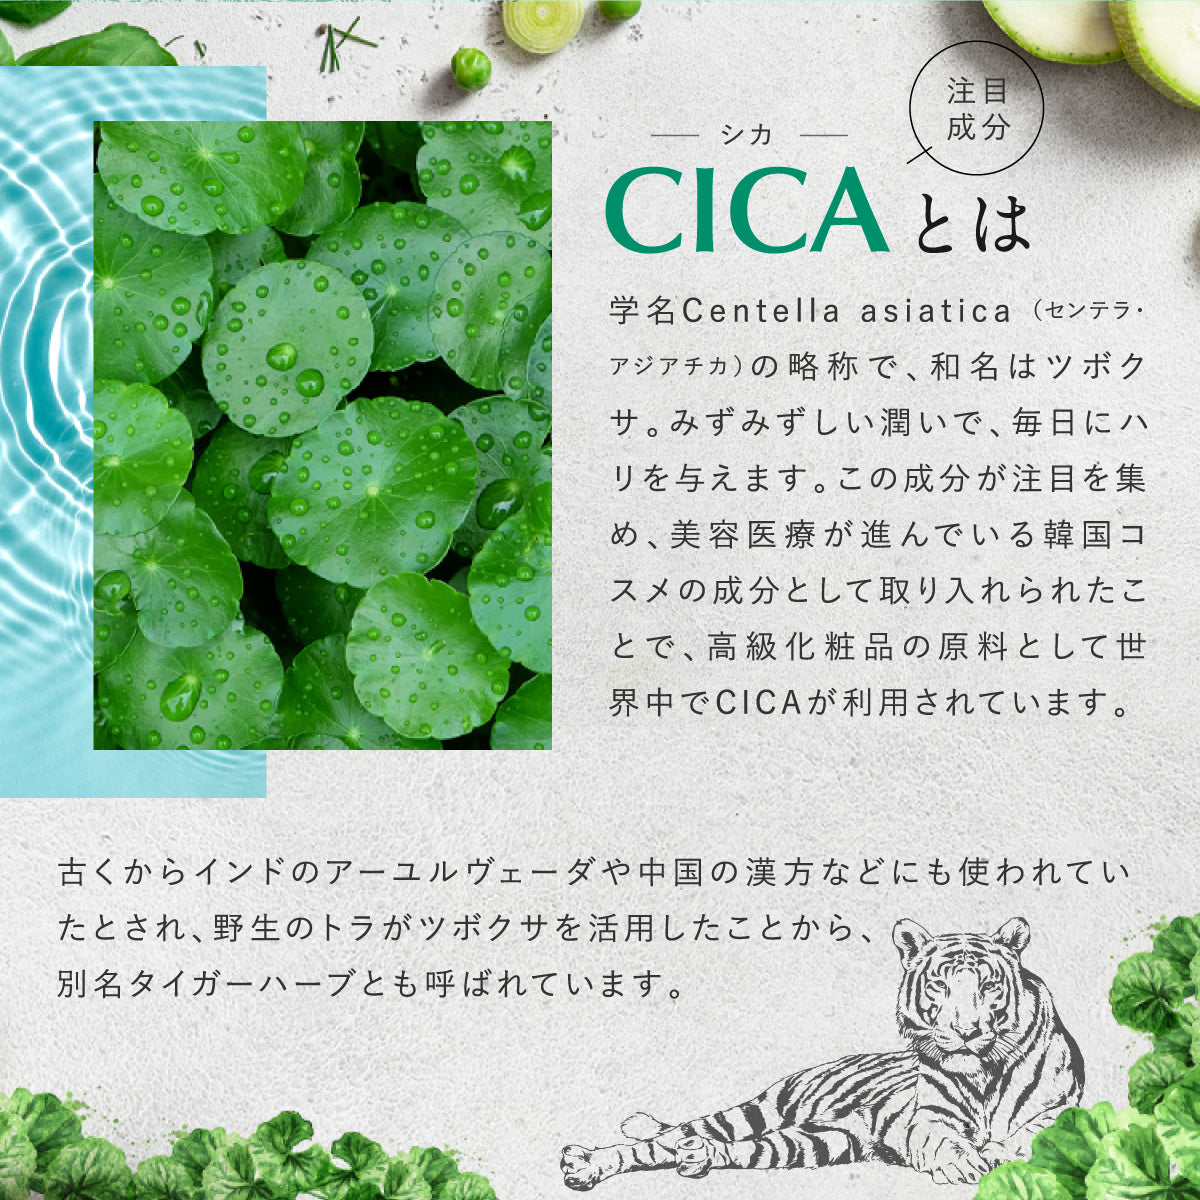 CICA (120 Tablets x 2 Packs) by FINE JAPAN